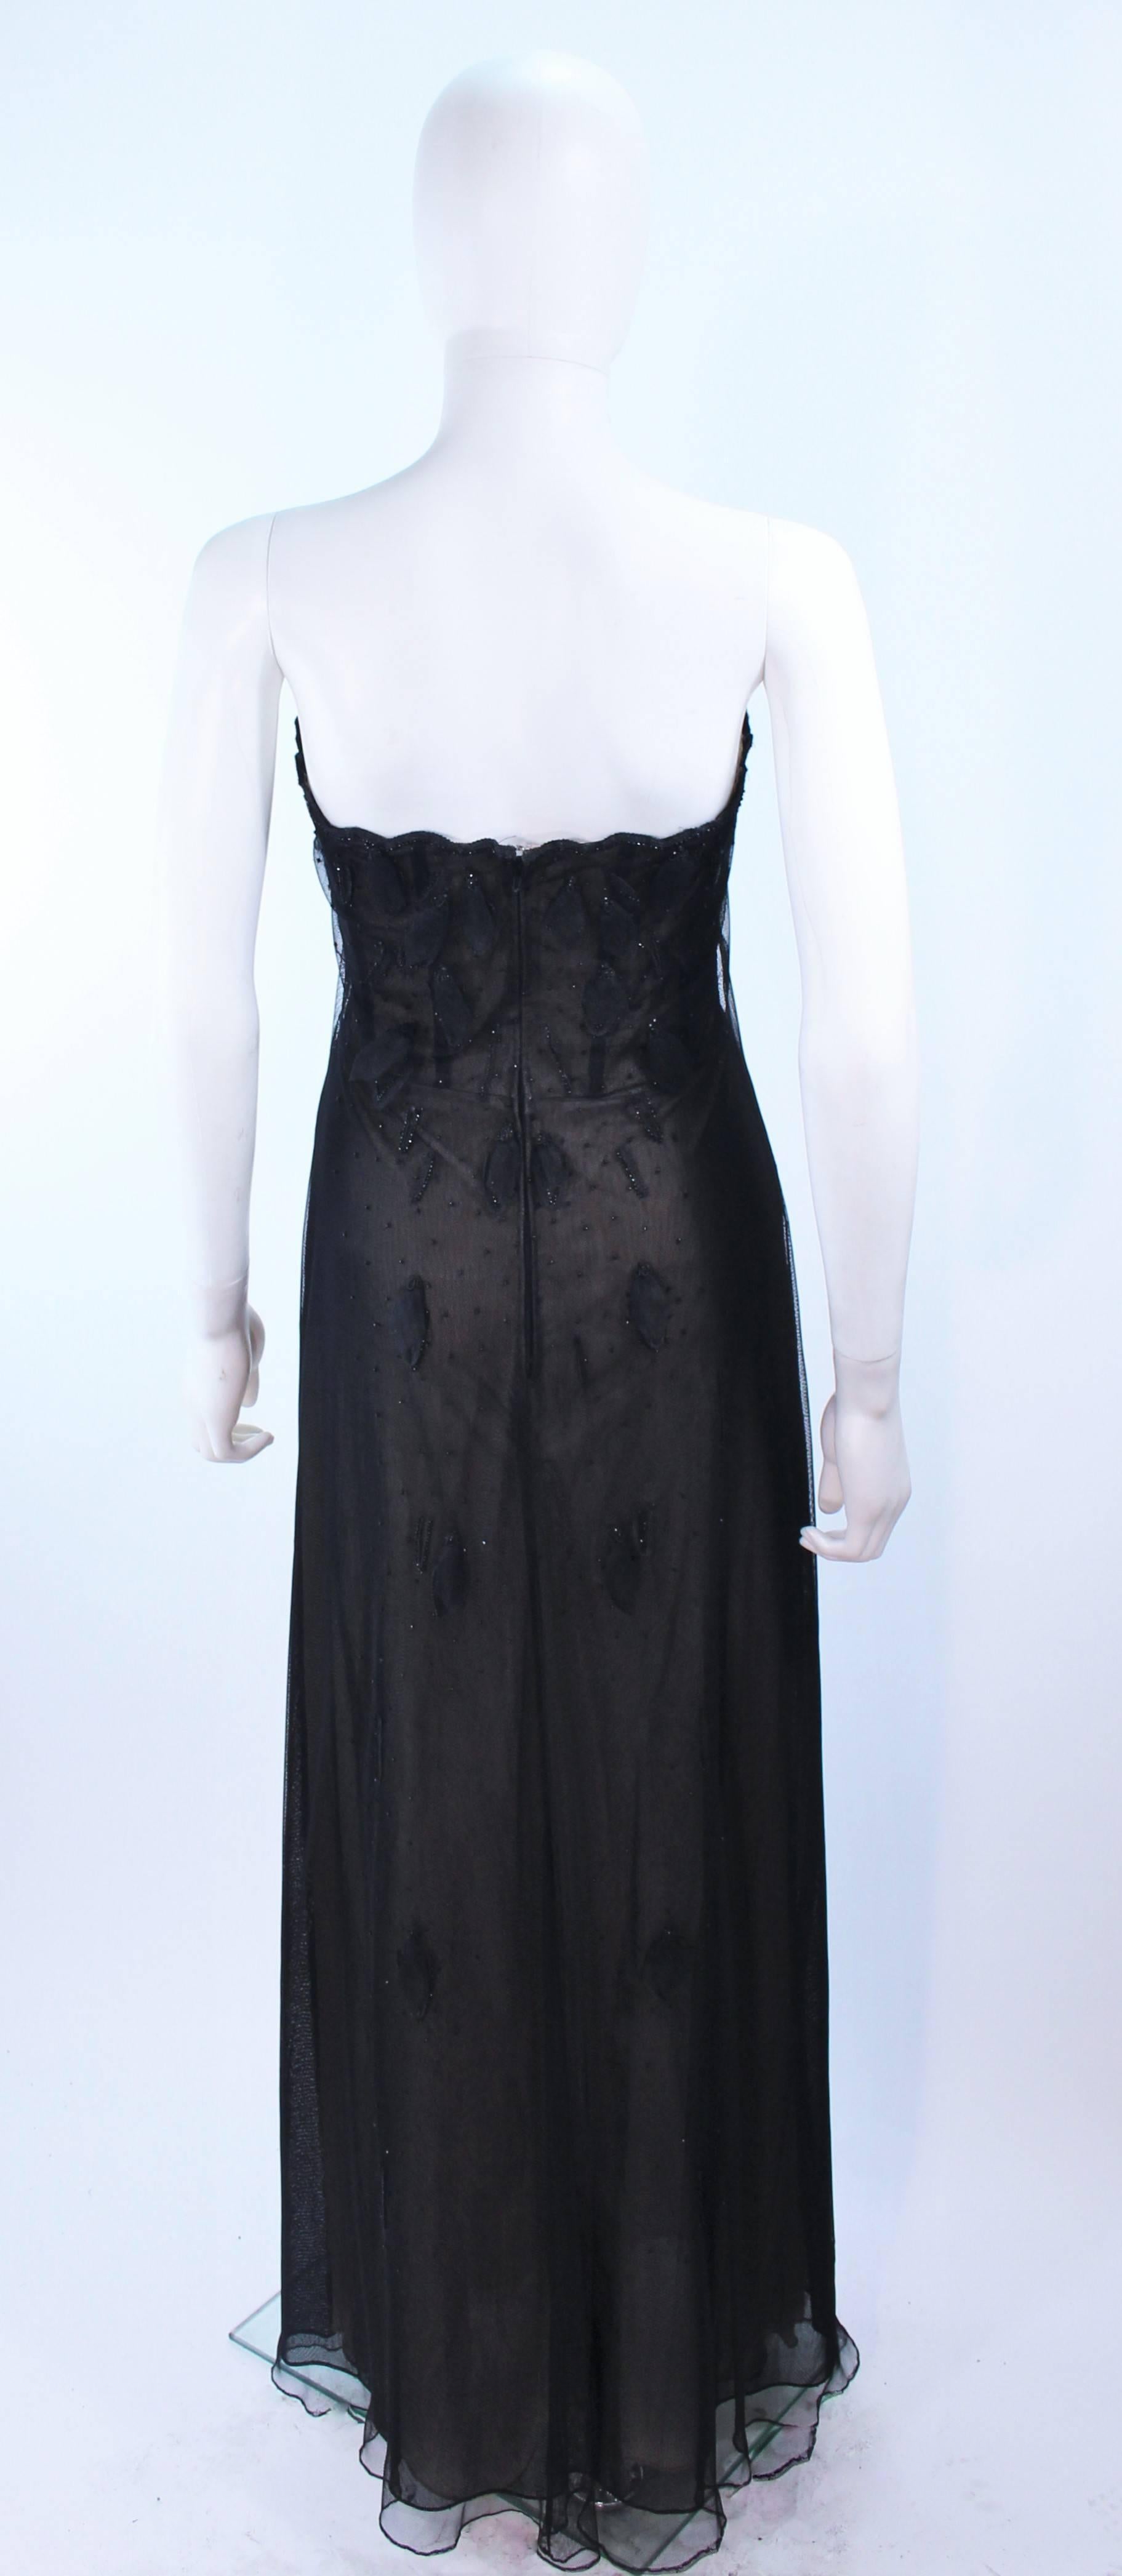 Custom Black Floral Beaded Applique Gown with Nude Size 2 For Sale 4